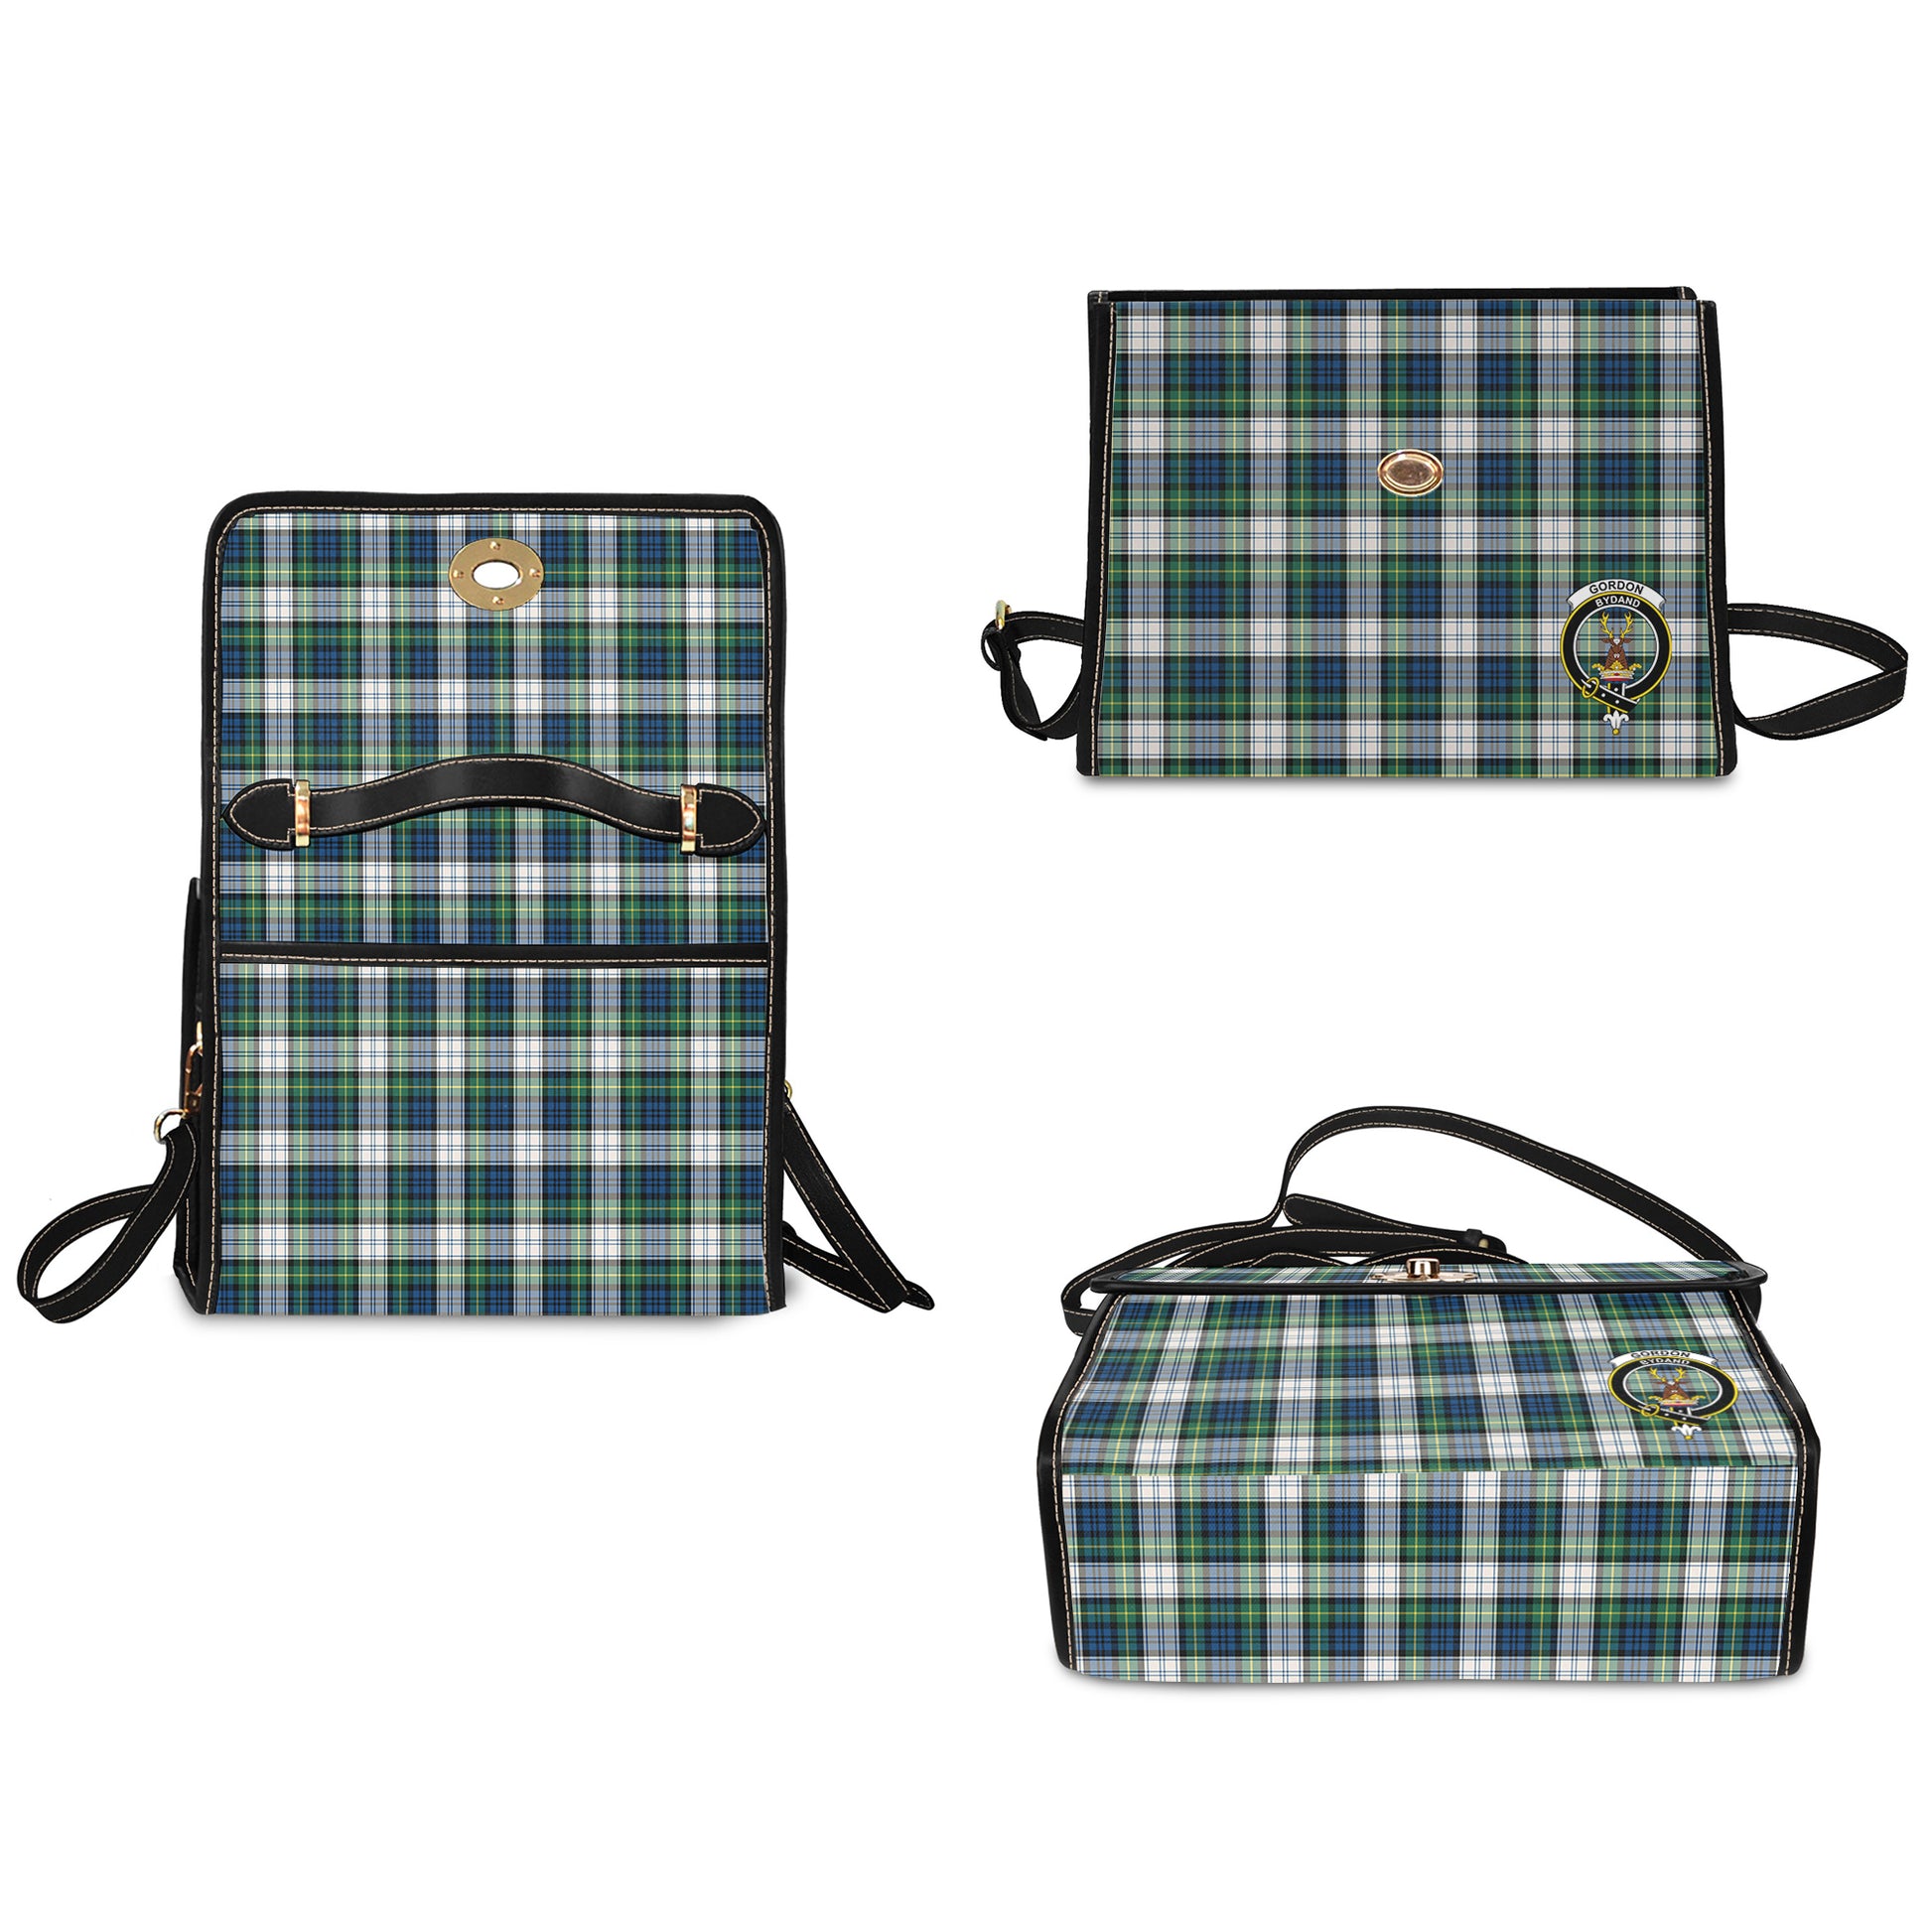 gordon-dress-ancient-tartan-leather-strap-waterproof-canvas-bag-with-family-crest